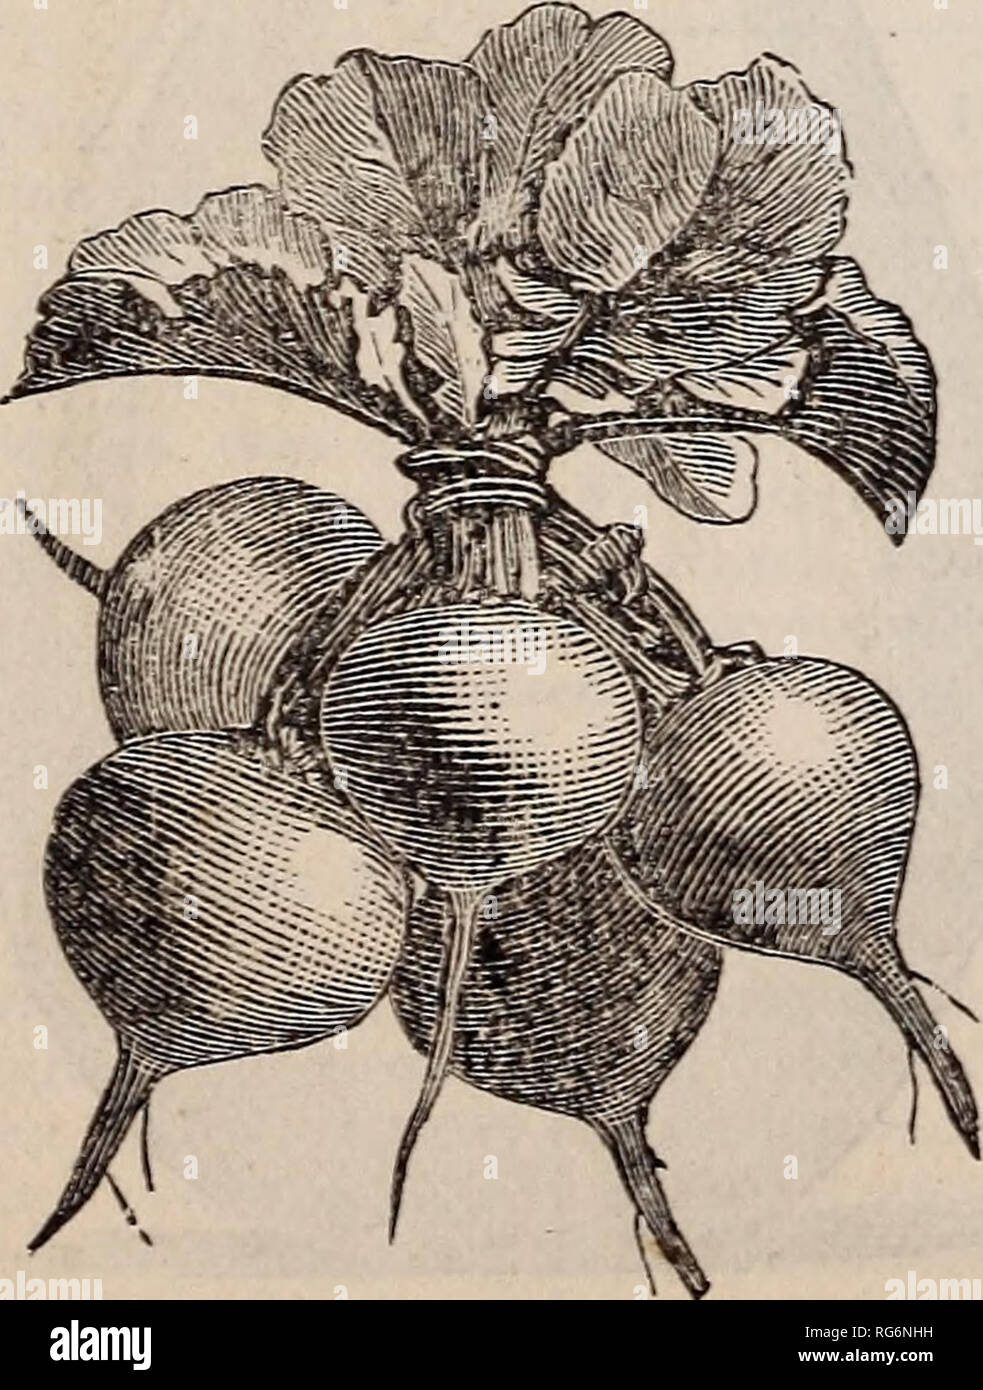 . Burpee's farm annual : garden, farm, and flower seeds, thoroughbred stock. Nursery stock Pennsylvania Philadelphia Catalogs; Flowers Pennsylvania Catalogs; Vegetables Pennsylvania Catalogs; Seeds Pennsylvania Catalogs. EARLY ROUND DARK RED, WHITE OLIVE-SHAPED RADISH. FRENCH BREAKFAST. RADISH. It is well known to market gardeners that French Radish seed is much superior to American or English. We have annual contracts with the best growers in France. Our prices include prepayment of postage ; if ordered by ex- press, at expense of purchaser, deduct 15 cts. per Bb from prices quoted. EARLY LON Stock Photo